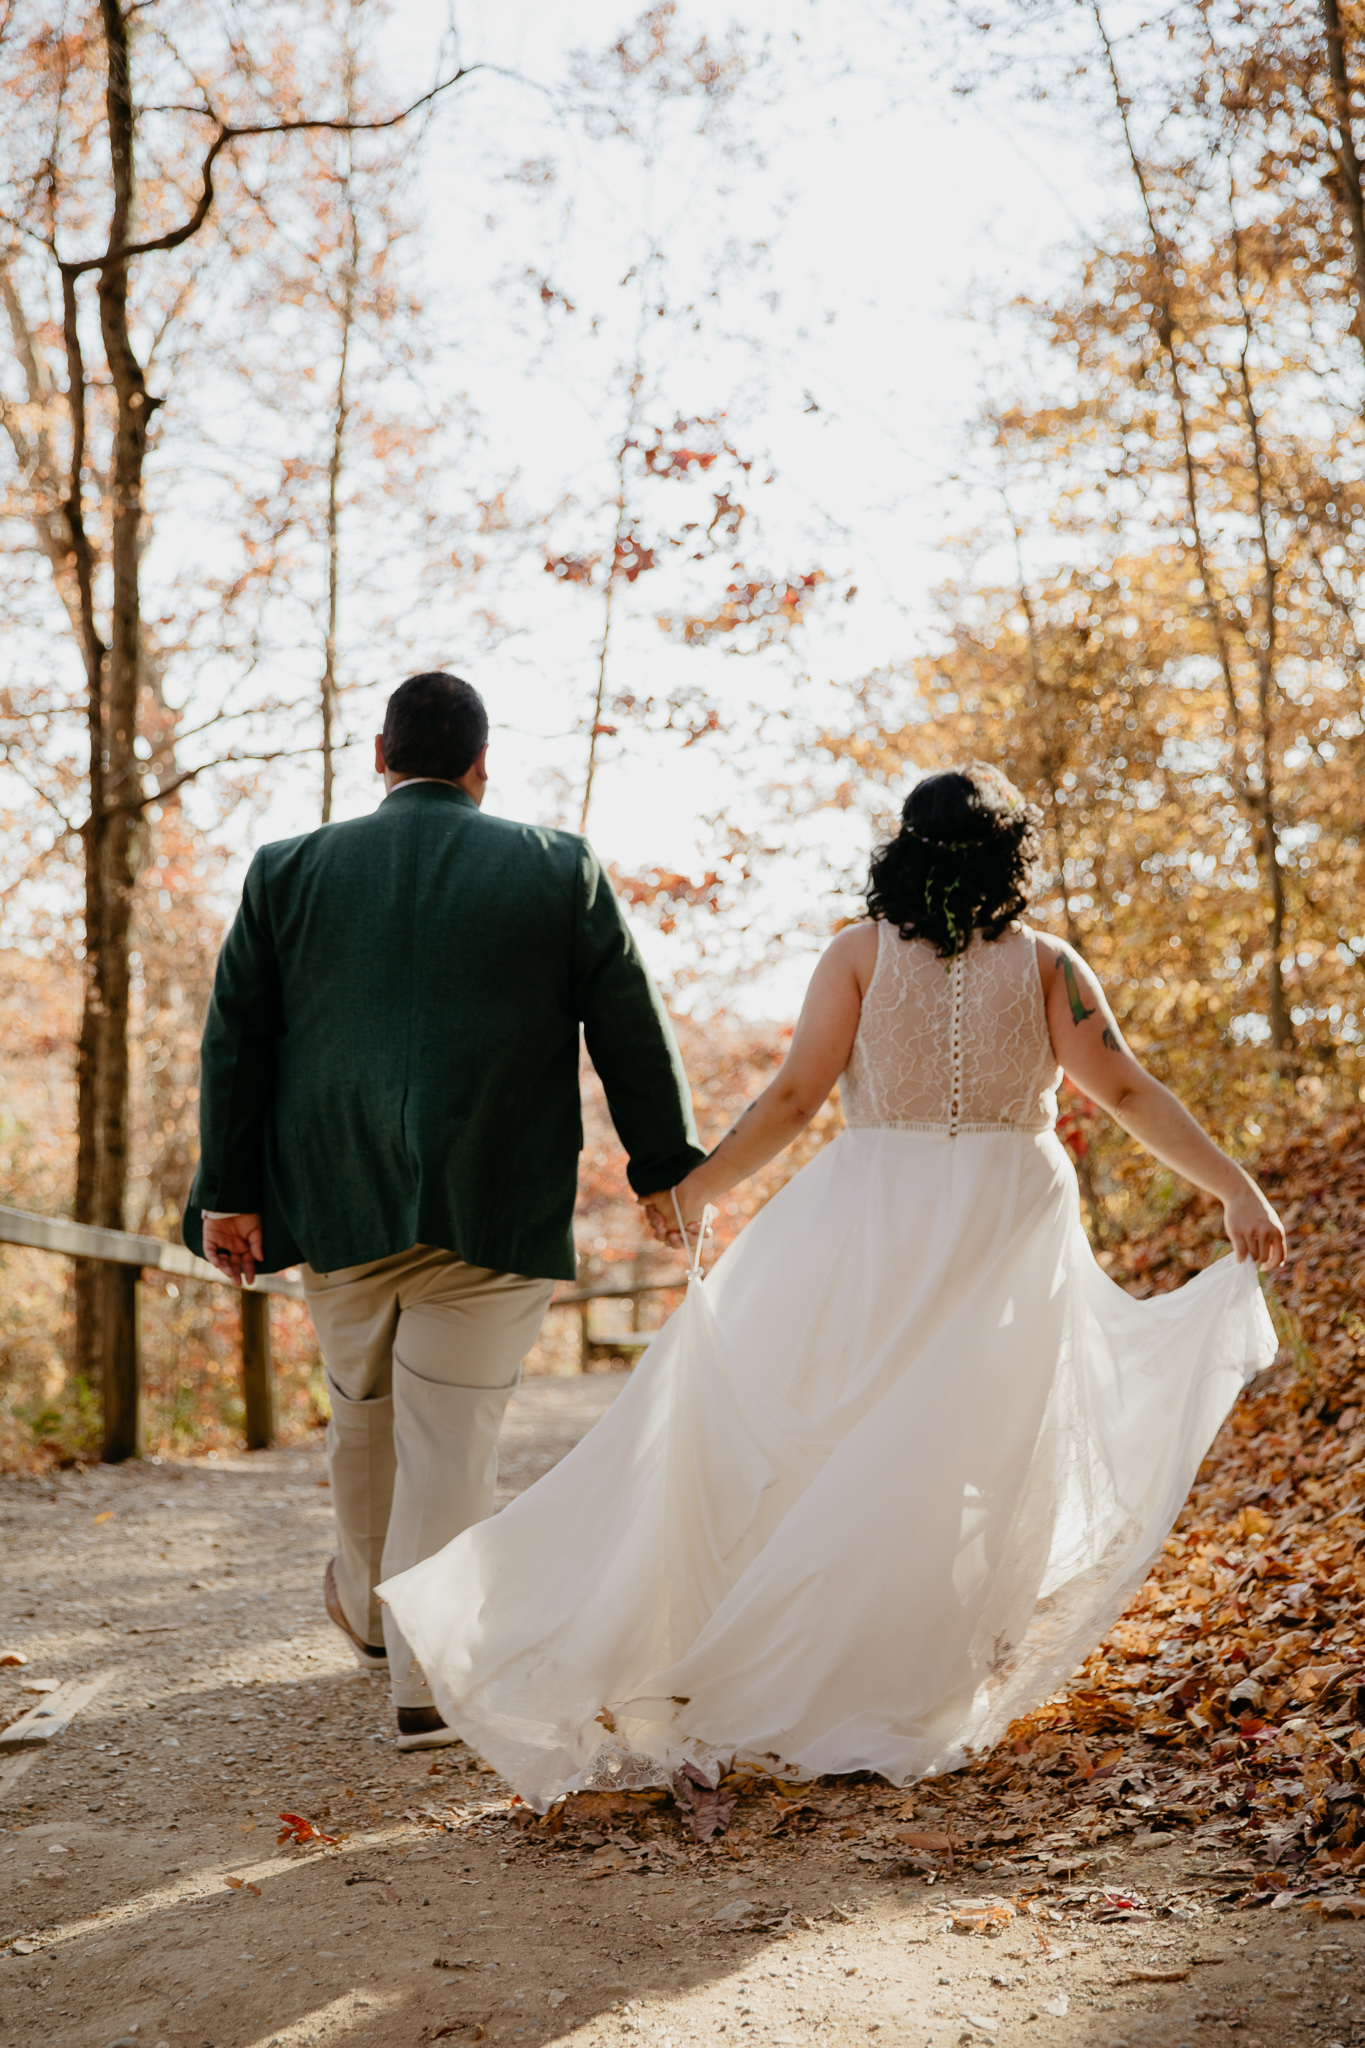 Bride and groom walking through the autumn woods at Turkey Run State Park, holding hands